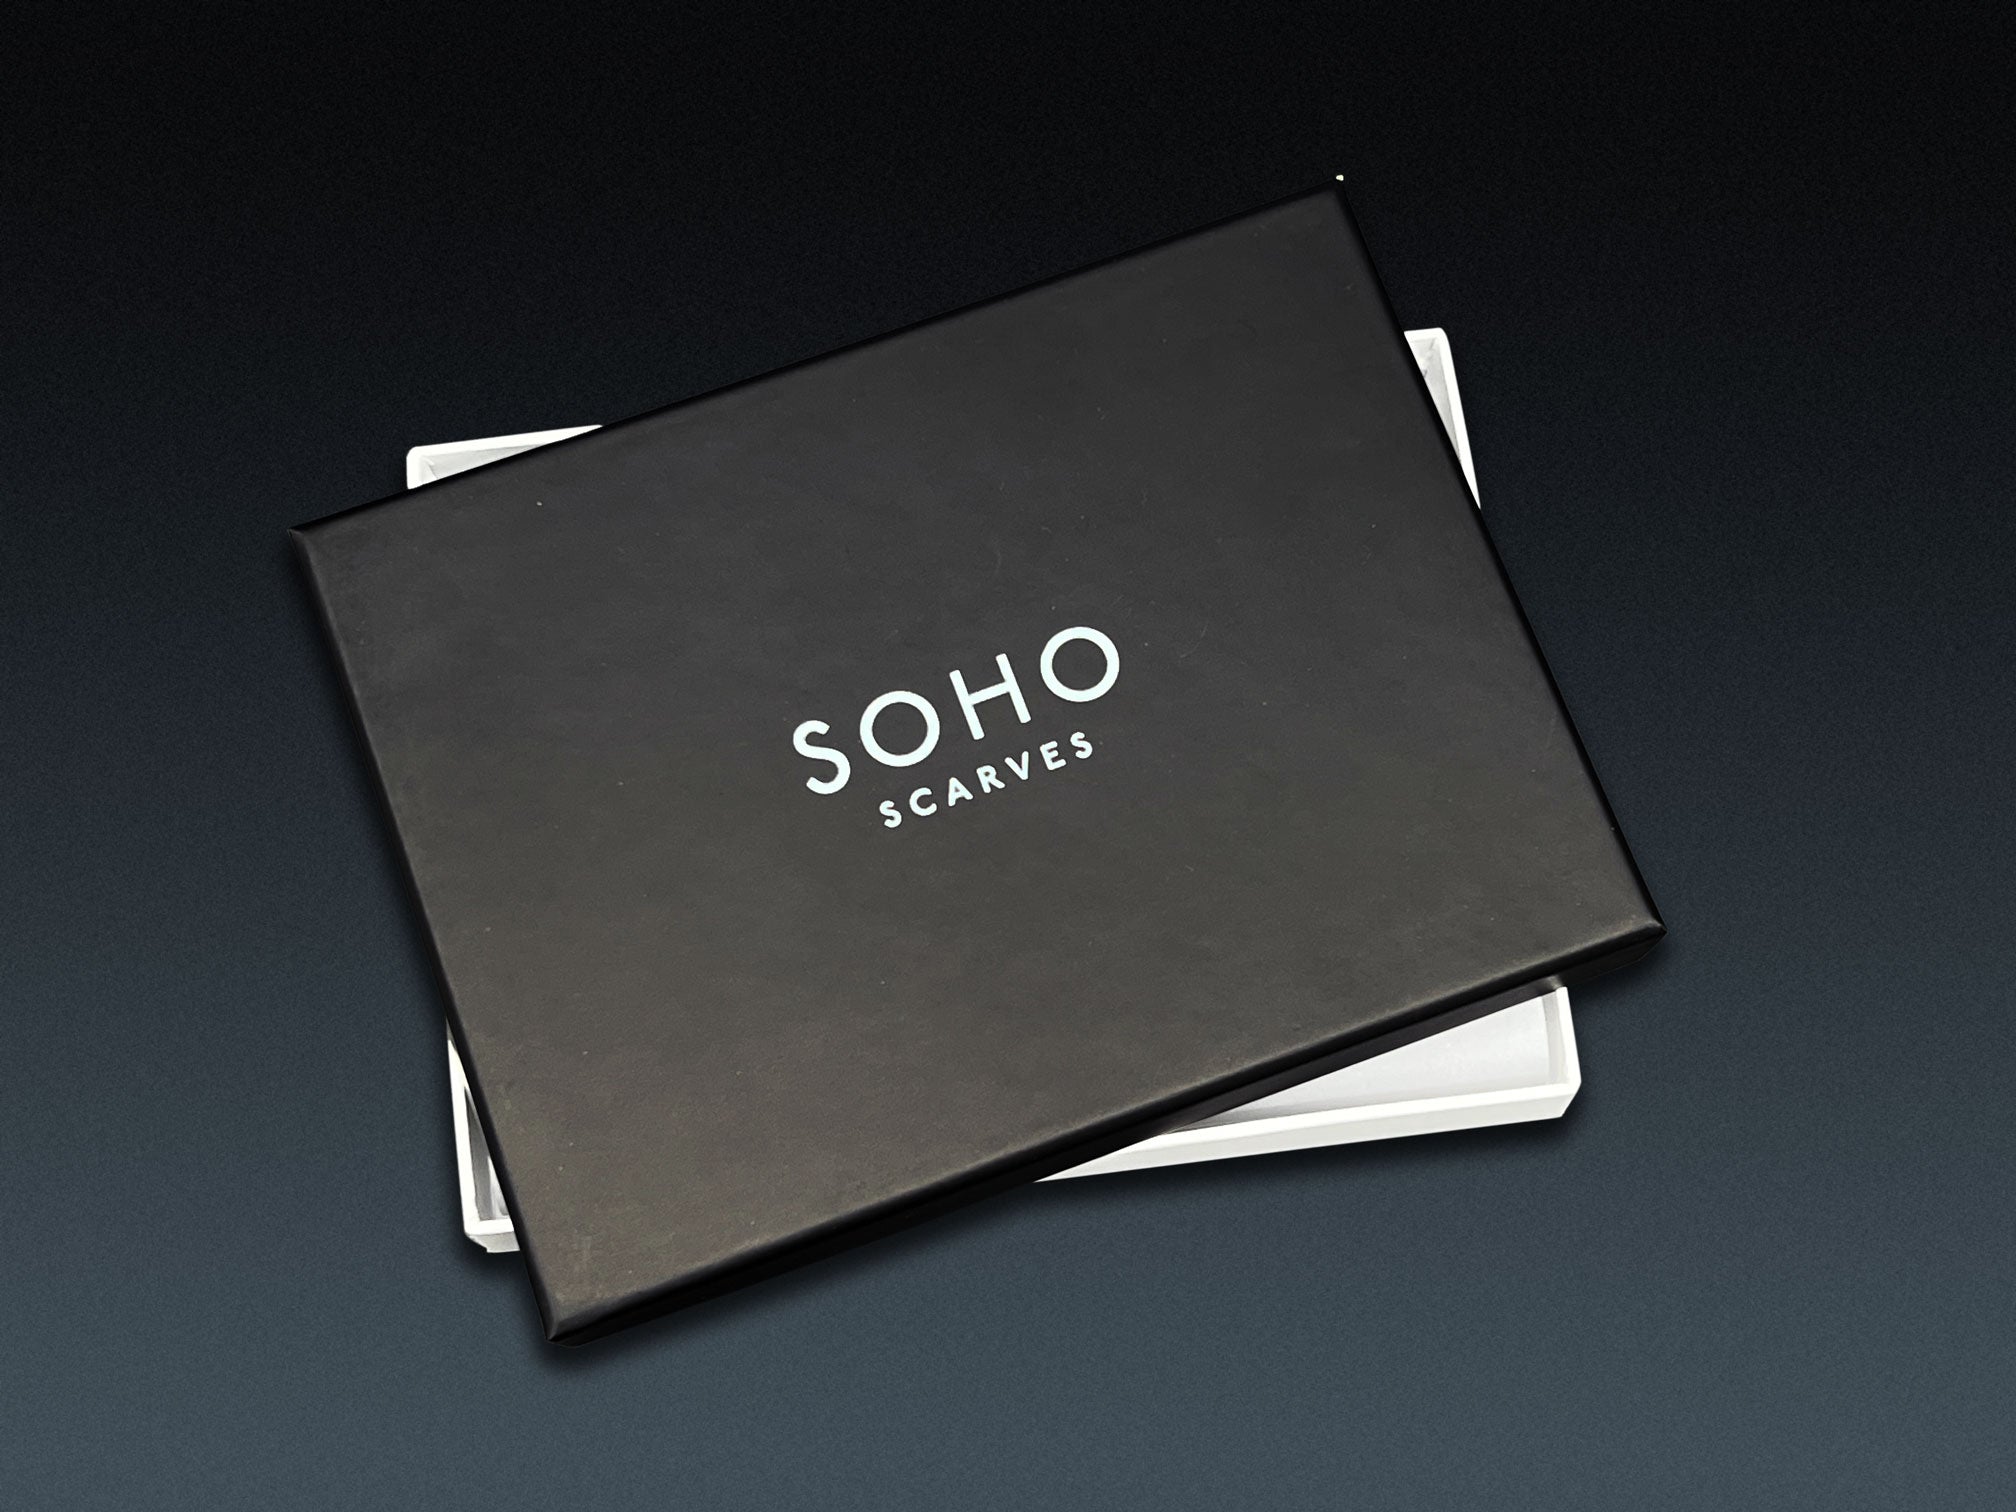 Small deluxe SOHO Scarves gift box for 'The Fan' neckerchief.